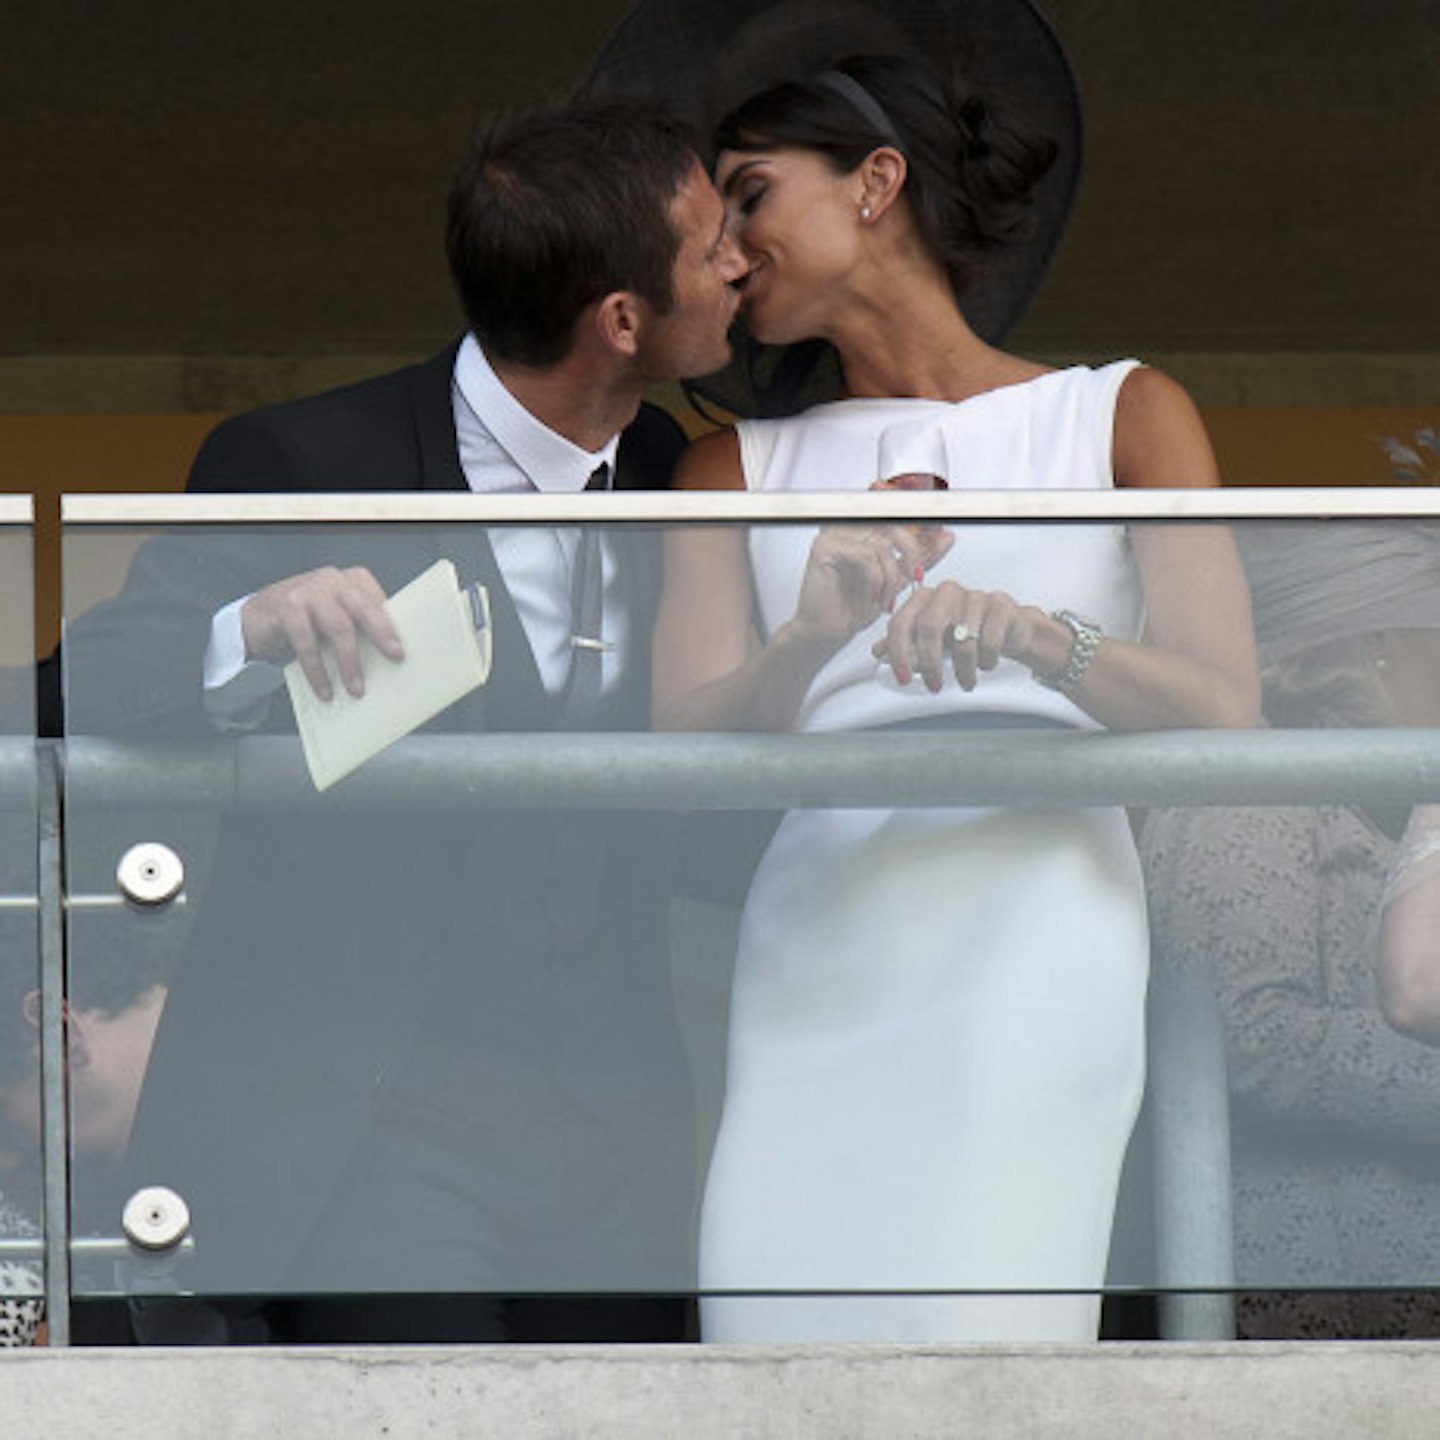 Christine Bleakley and Frank Lampard